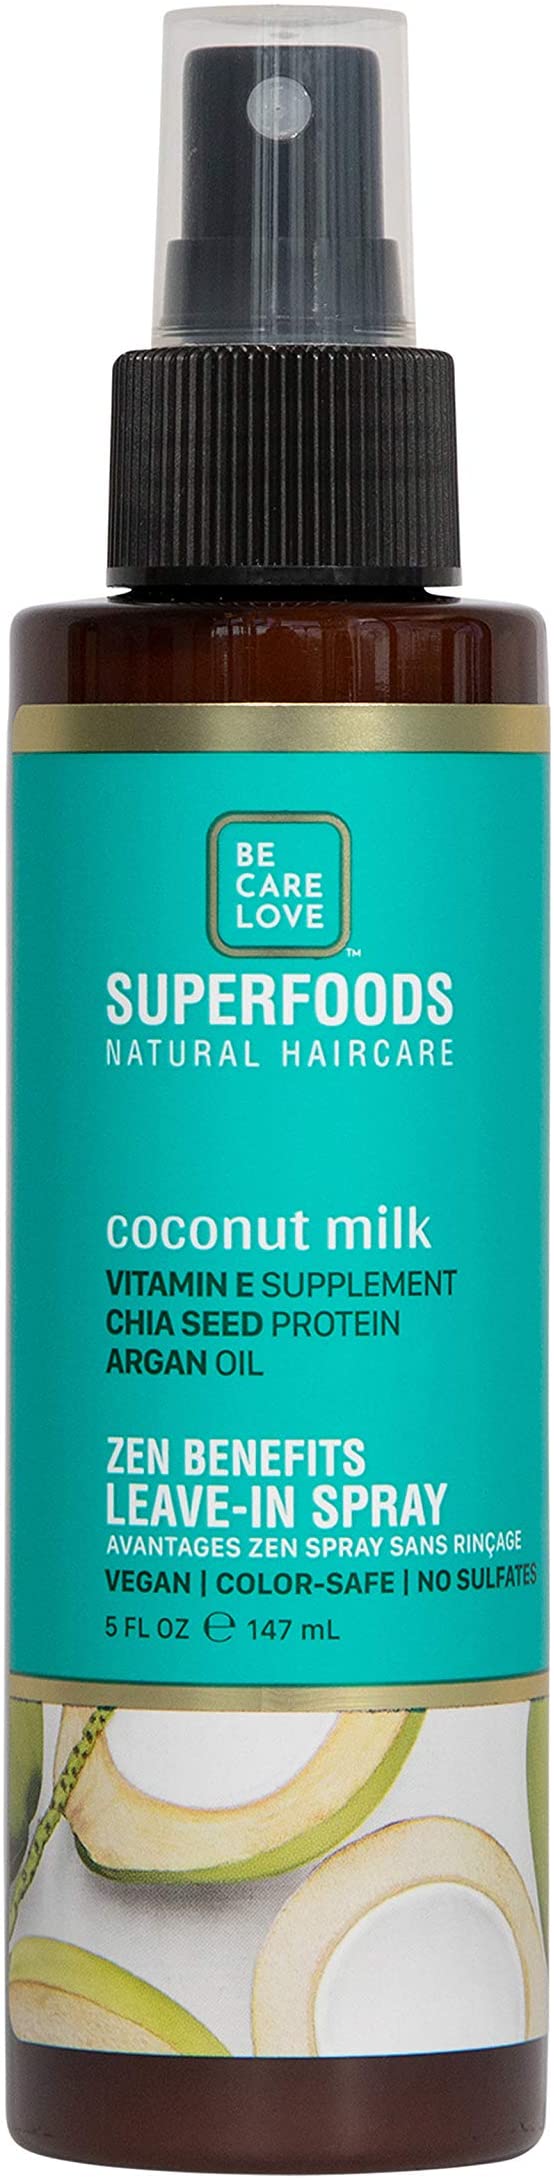 BCL Superfoods Natural Haircare Zen Benefits Leave-In Spray 5 oz